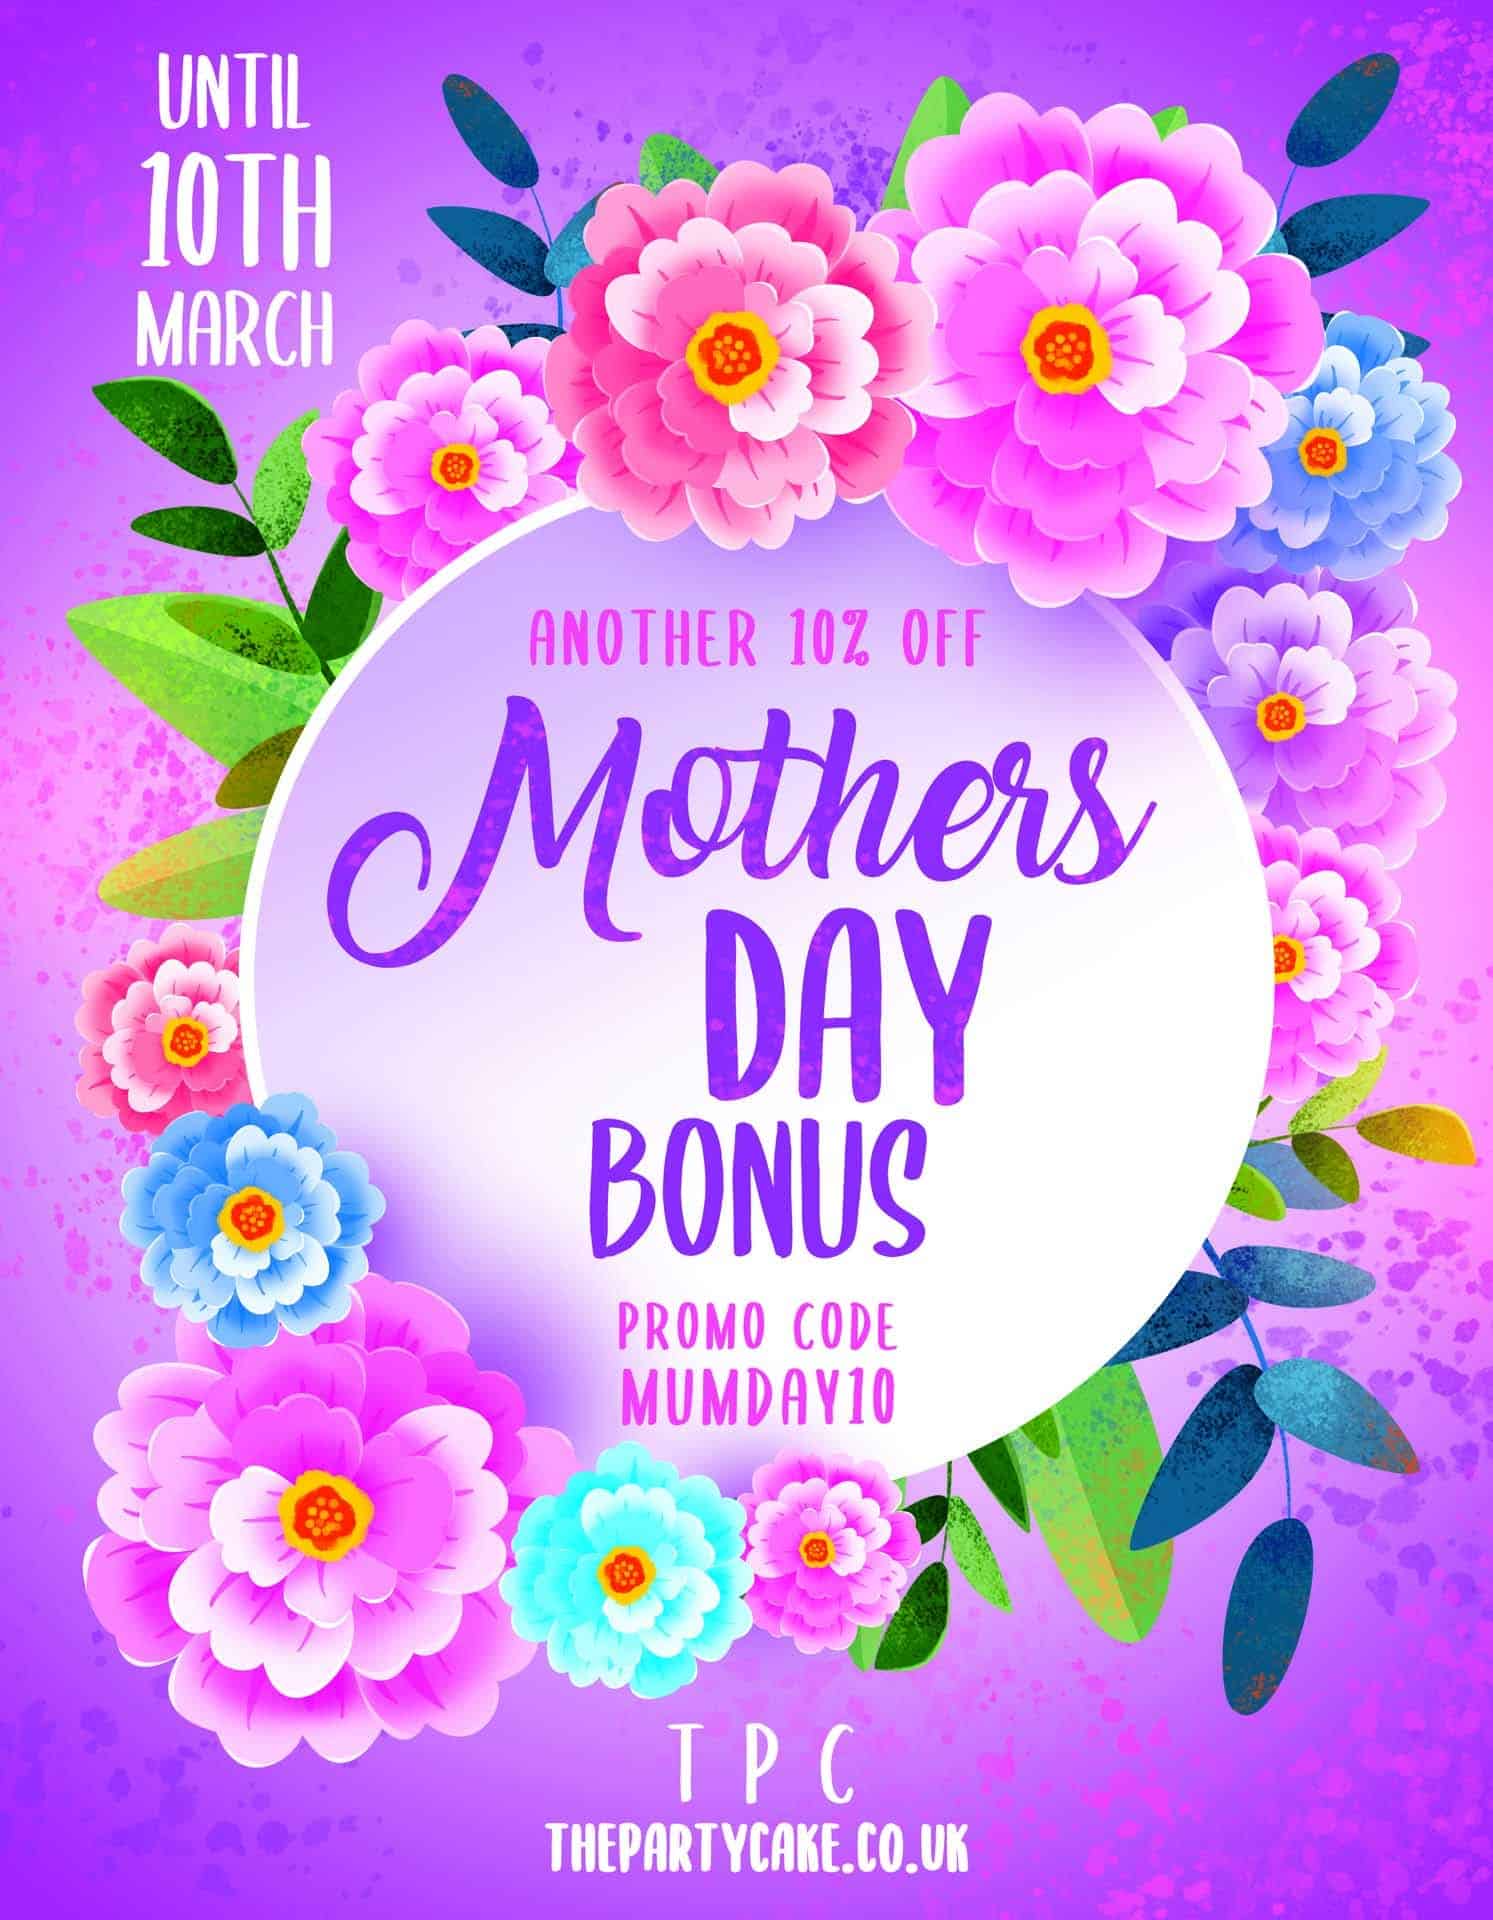 Featured image for “Mother’s Day Bonus”